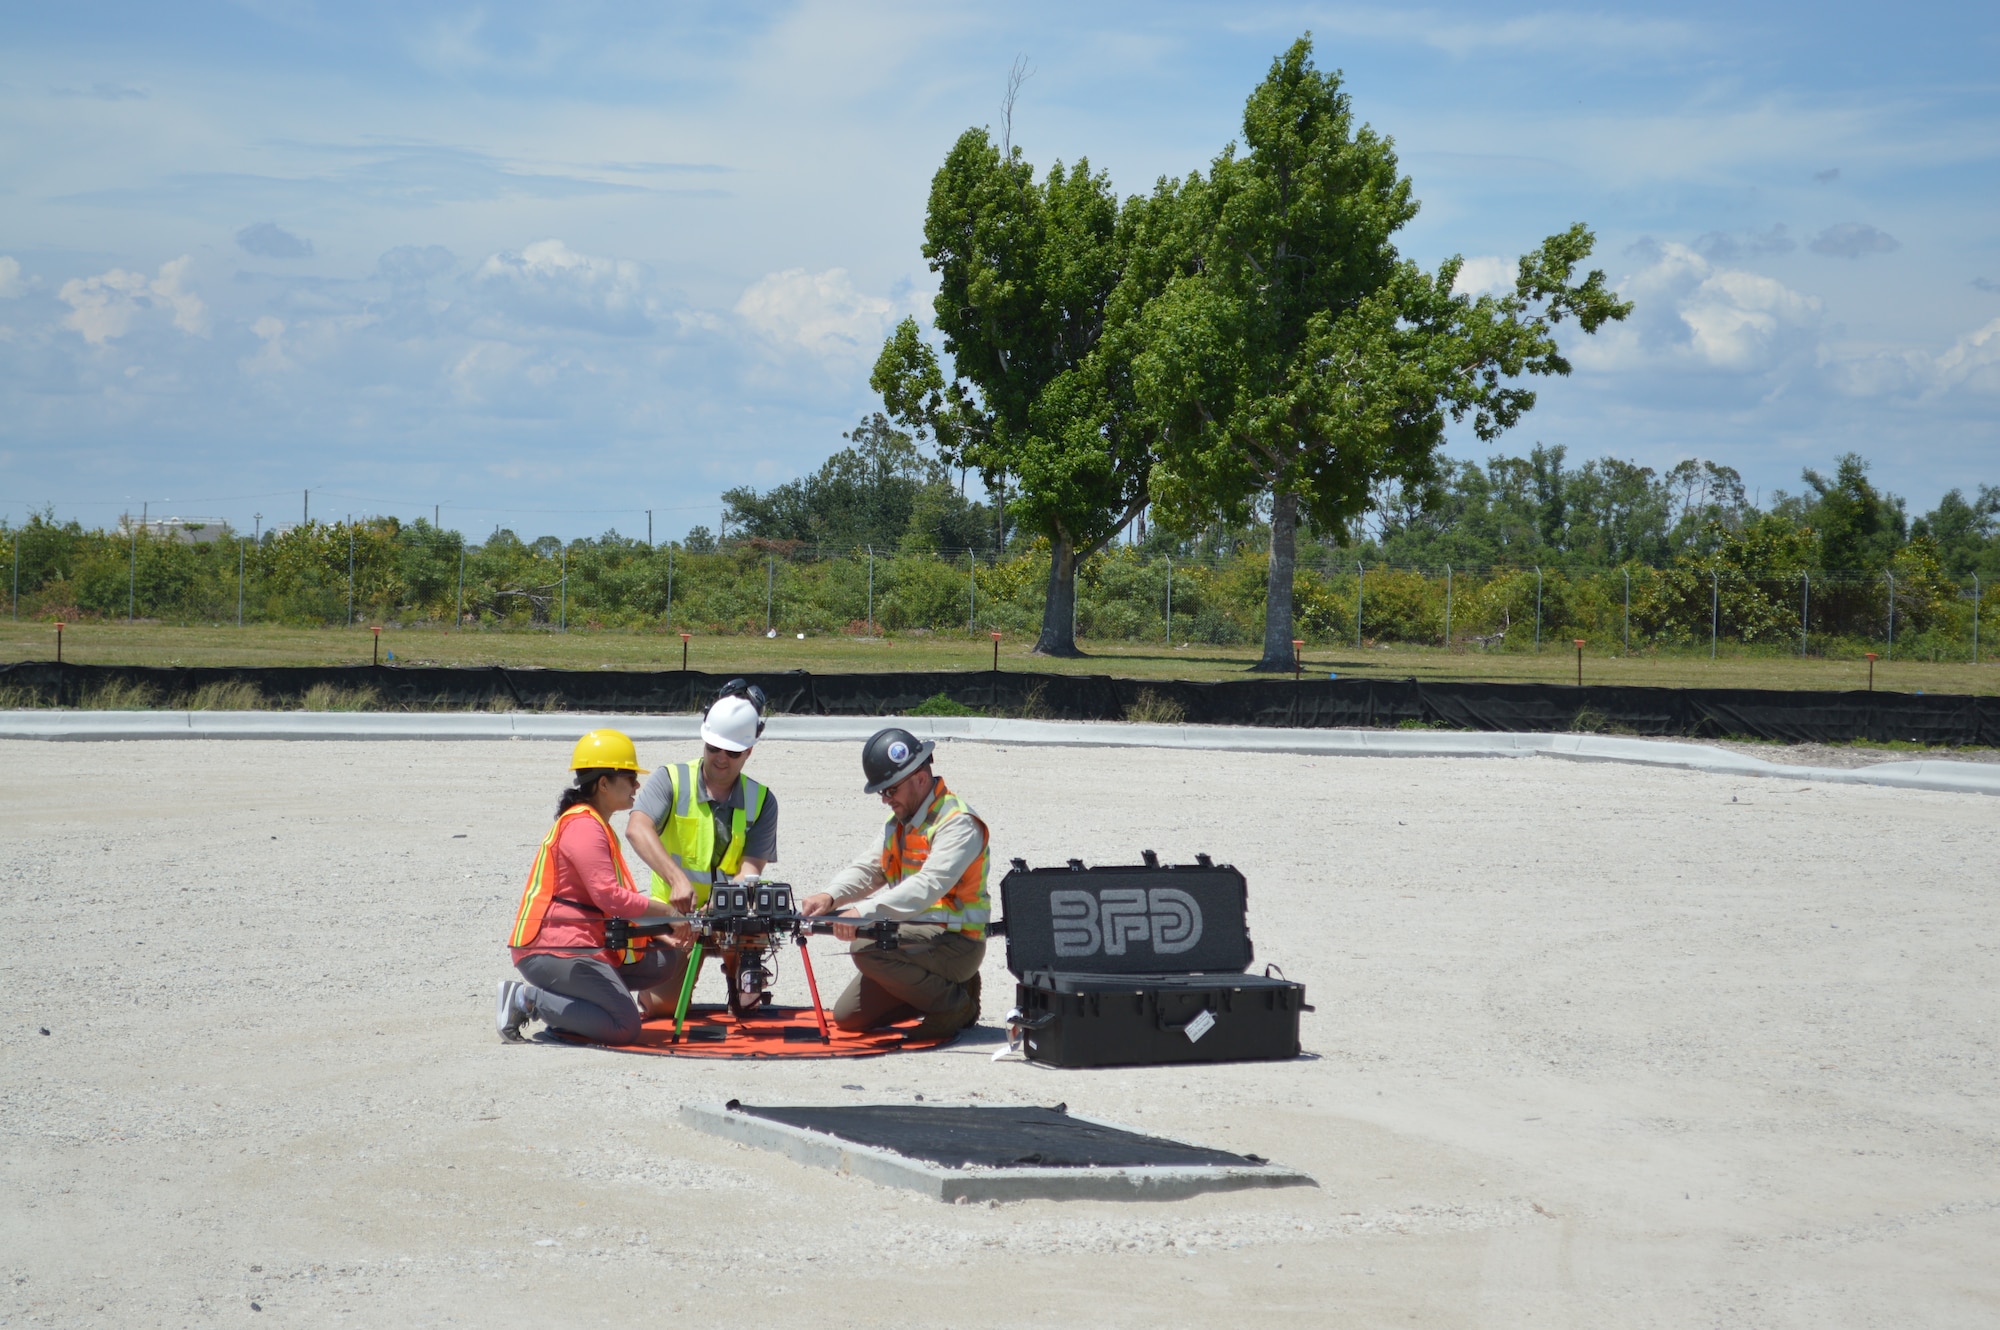 Technicians prepare a drone for flight at Tyndall Air Force Base, Florida, June 4, 2021. The drone captured data for a Digital Twin replica of the installation. (U.S. Air Force photo by Sarah McNair)